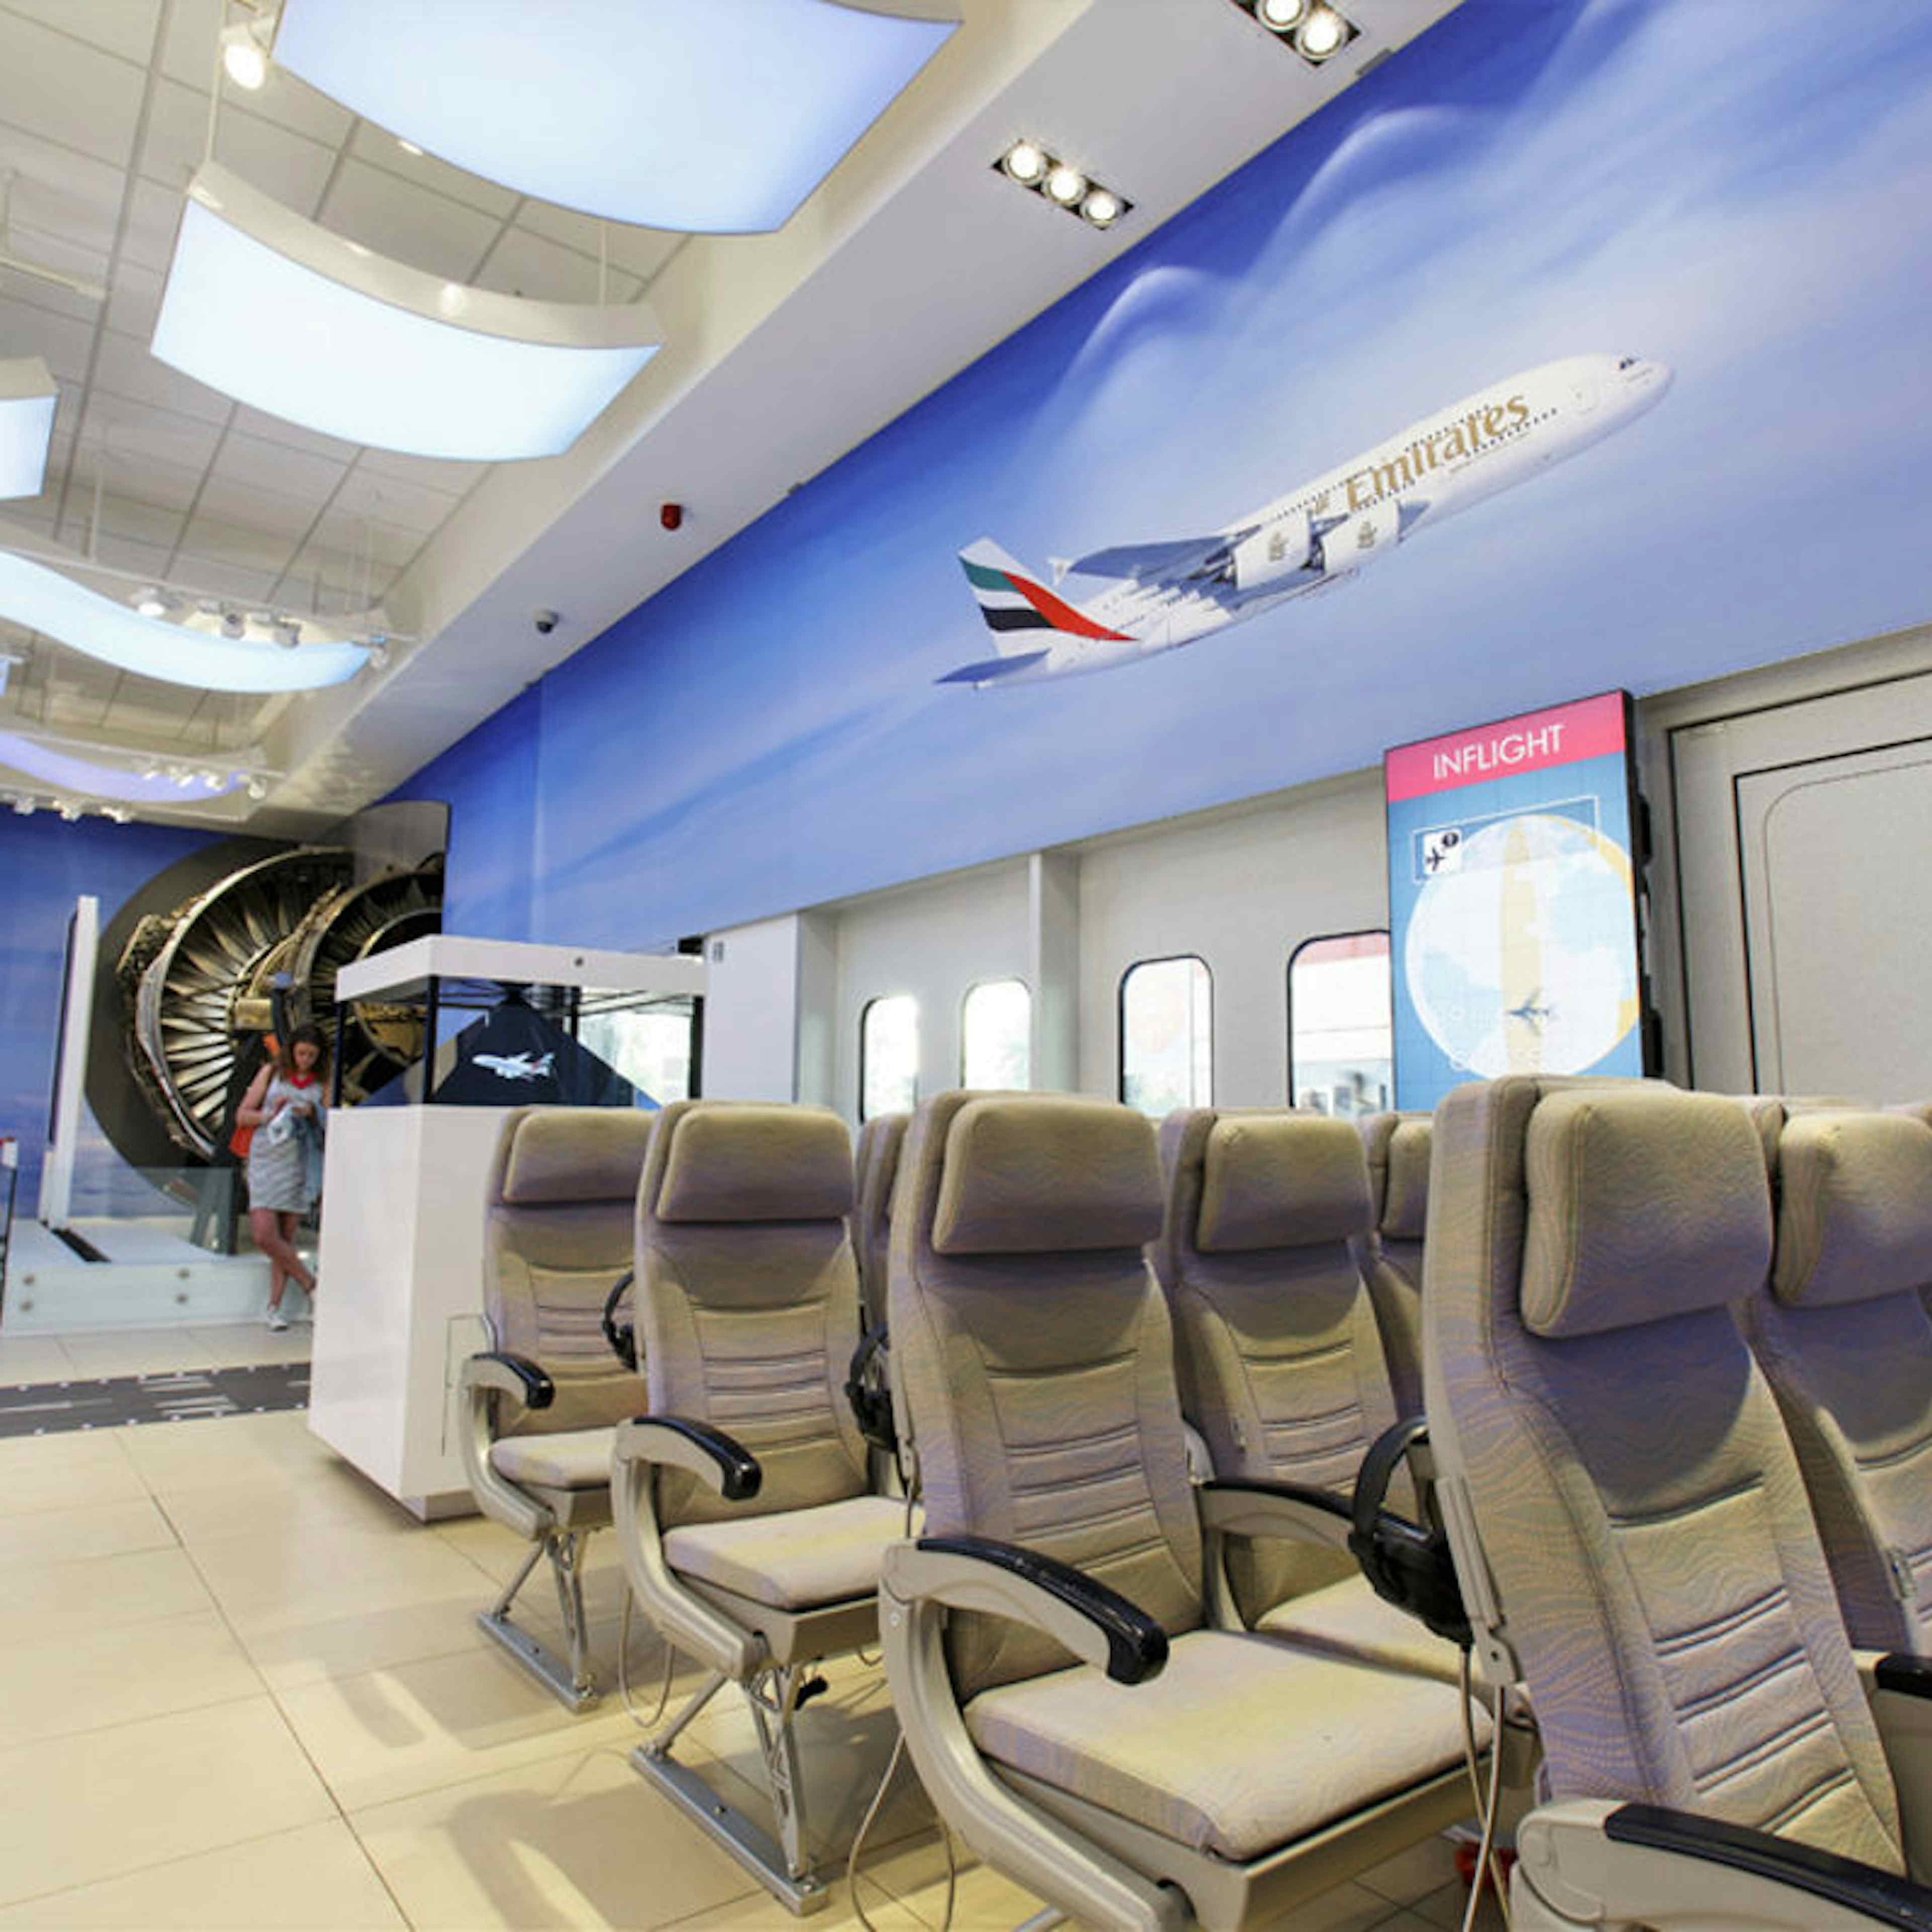 The Emirates Aviation Experience - Exhibition image 3